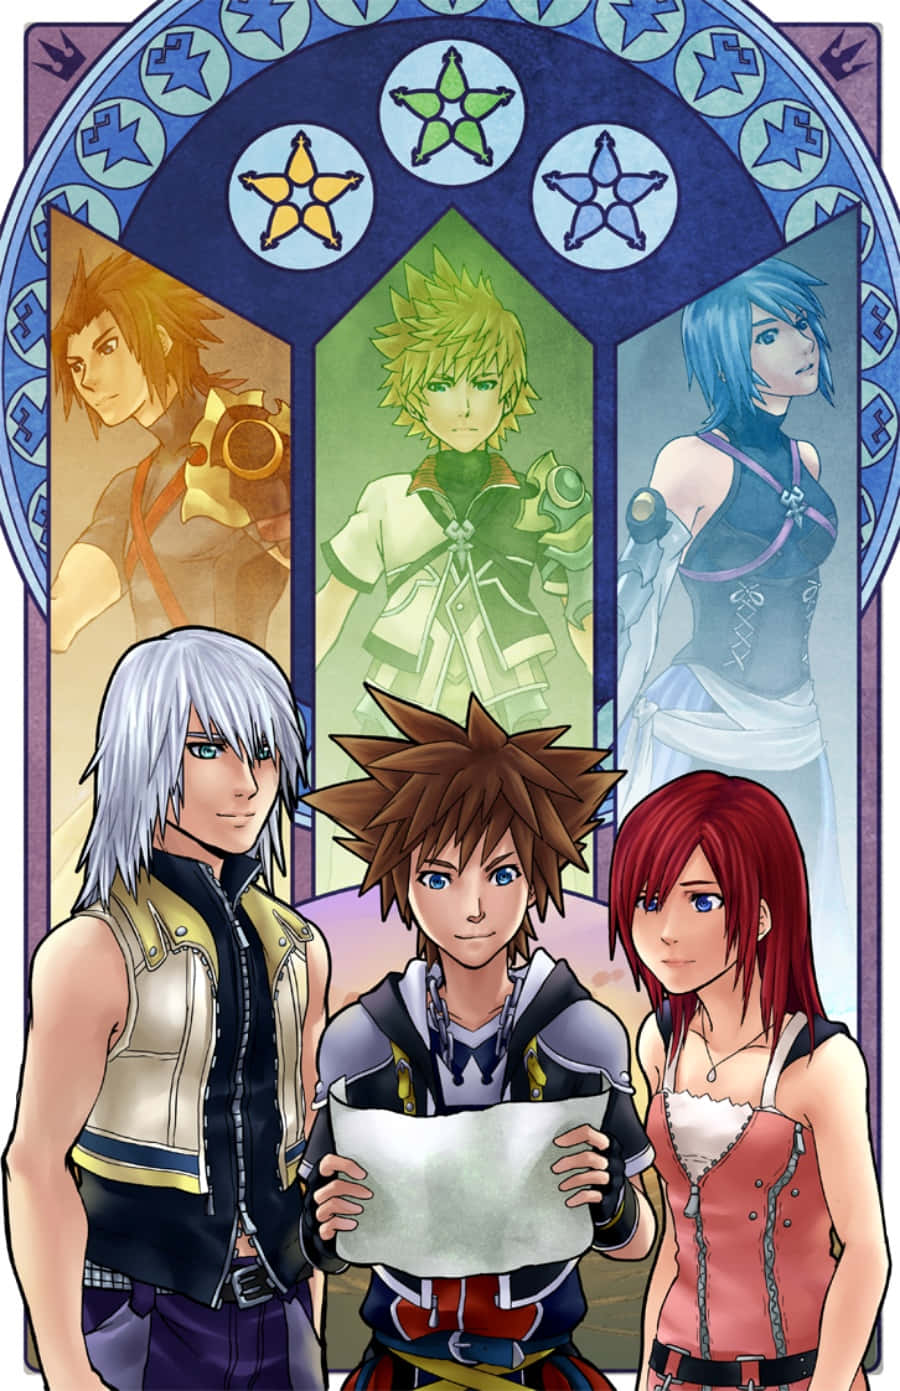 Go on an epic journey with Sora and his friends in Kingdom Hearts